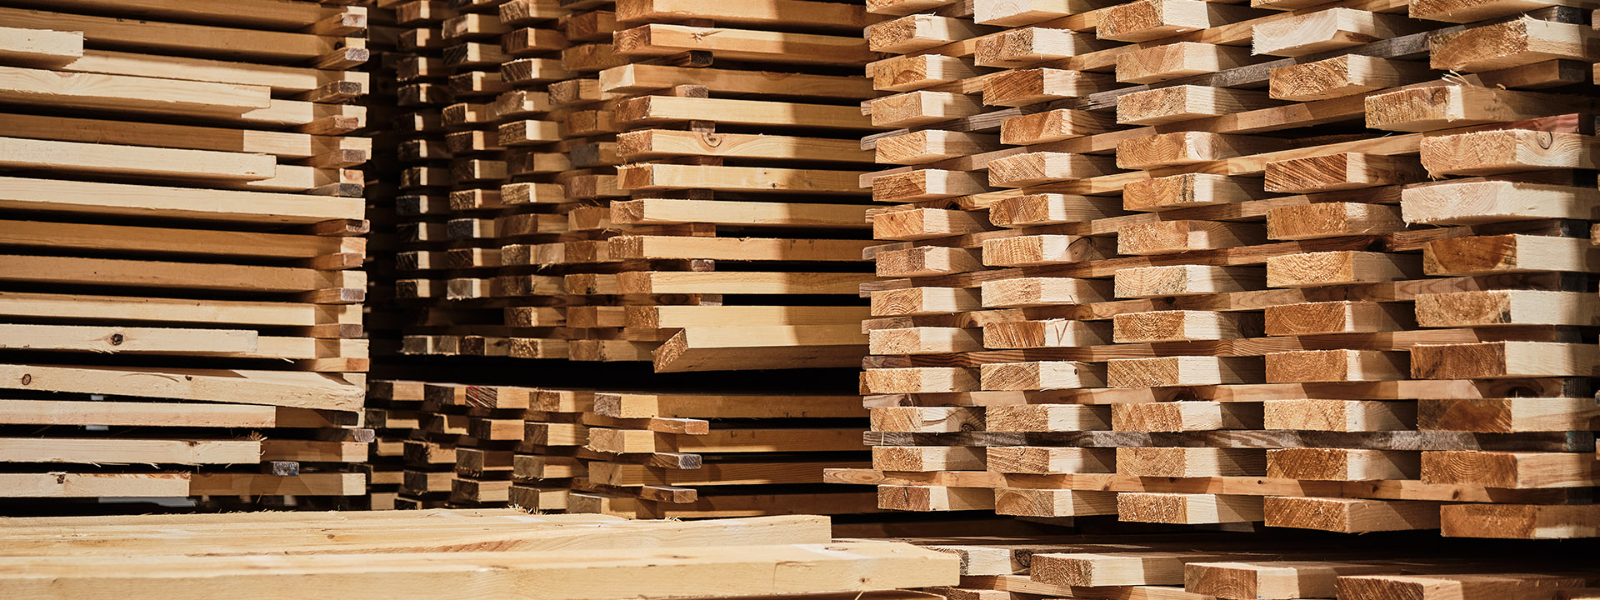 HOLTTEM AS - We are an innovative wood production company located in Karksi-Nuia, which has been serving satisfied custome...